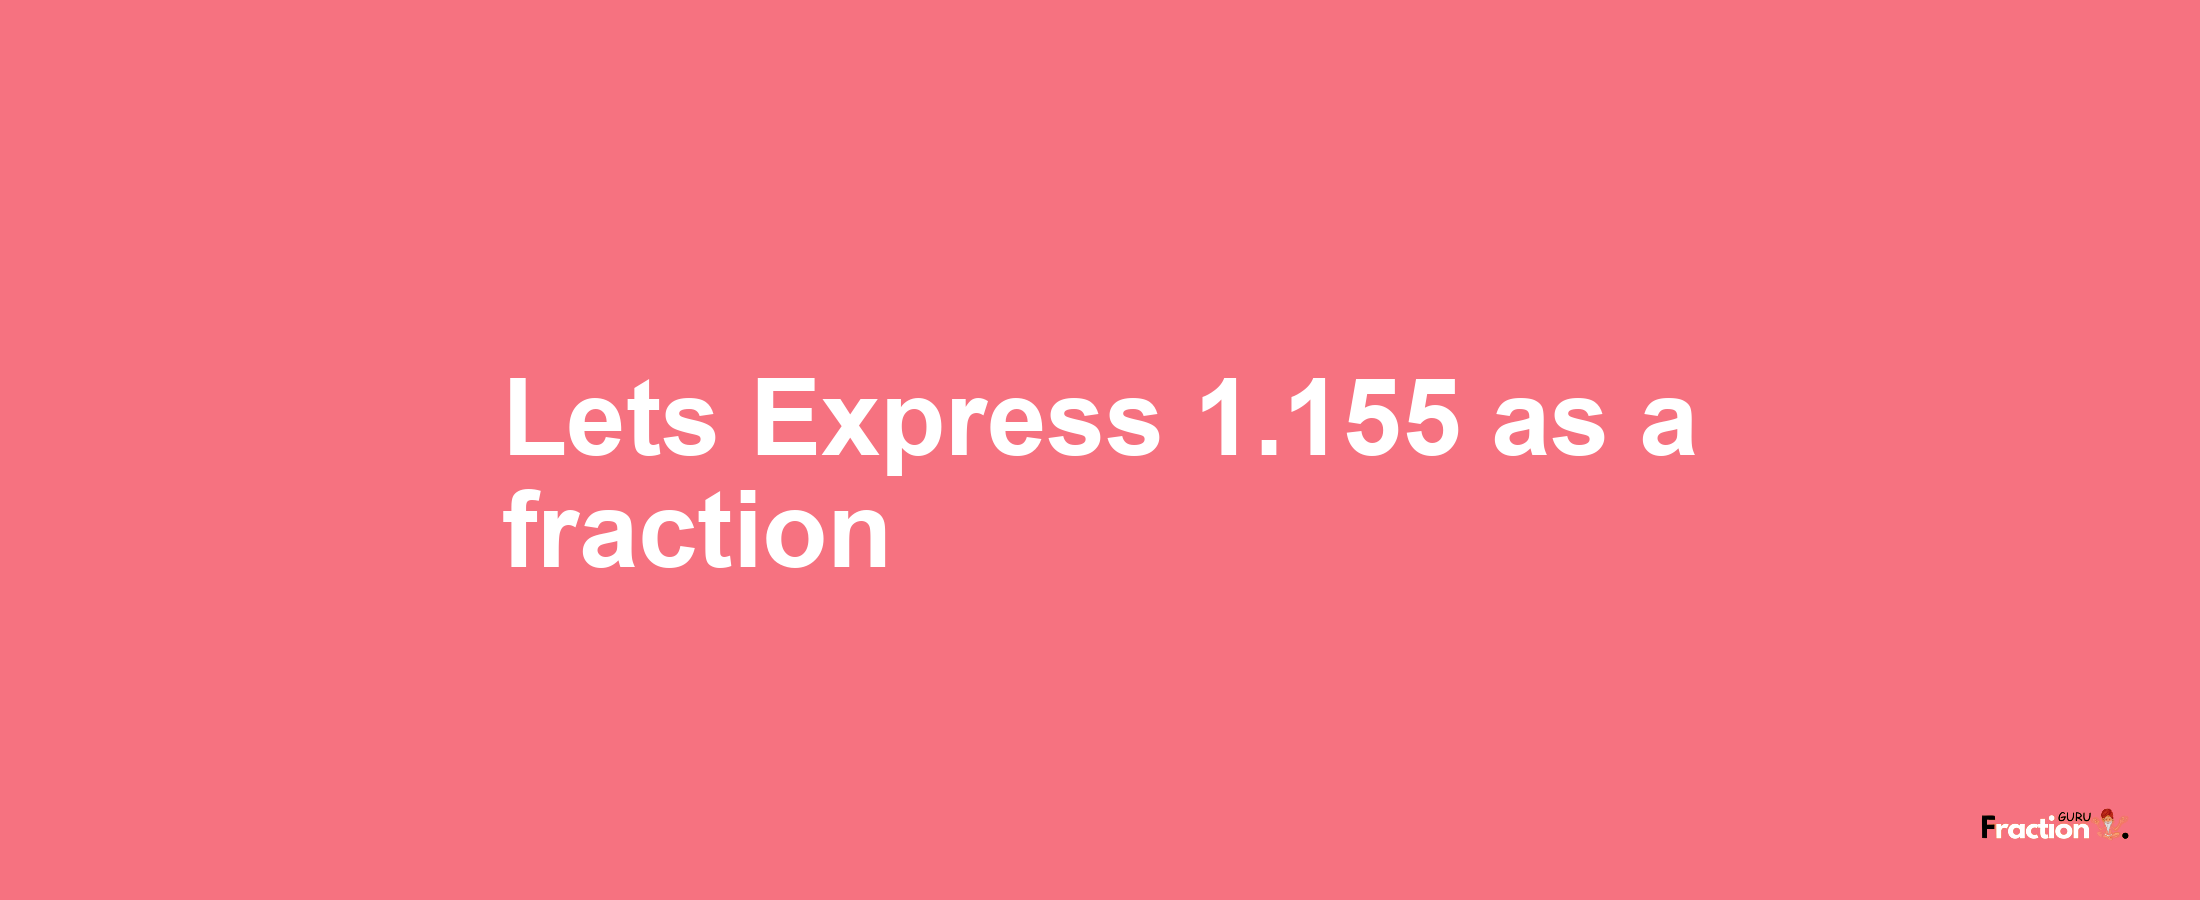 Lets Express 1.155 as afraction